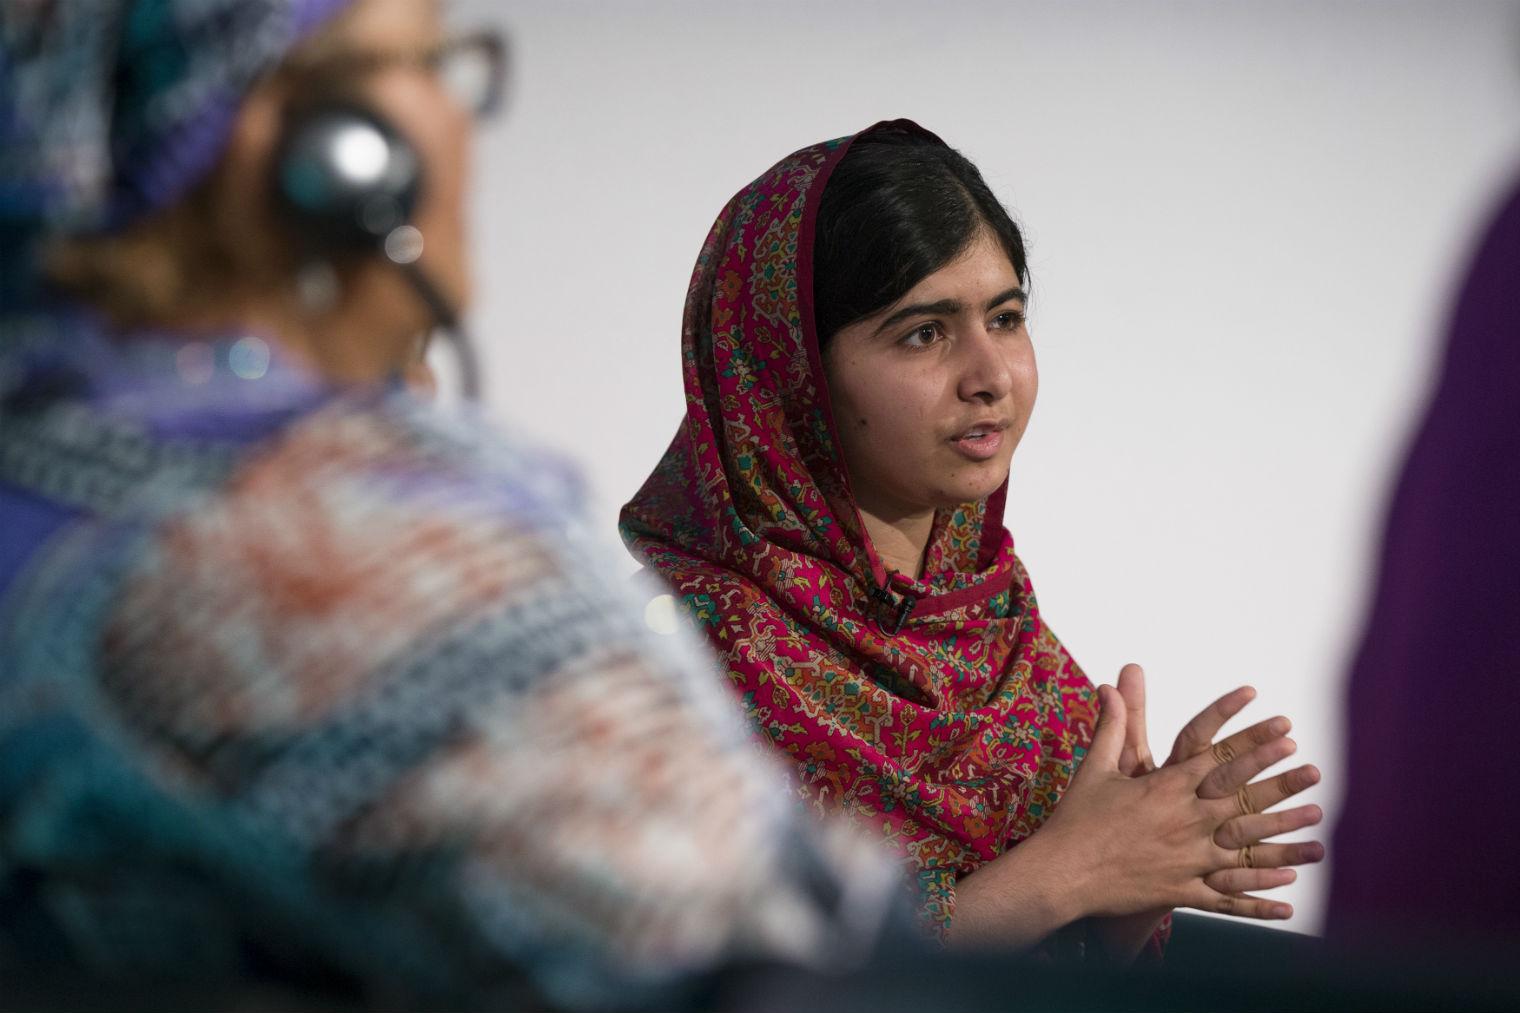 Malala Yousafzai  speaks at the UK's first Girl Summit to discuss FGM and forced marriage, 29th August 2014